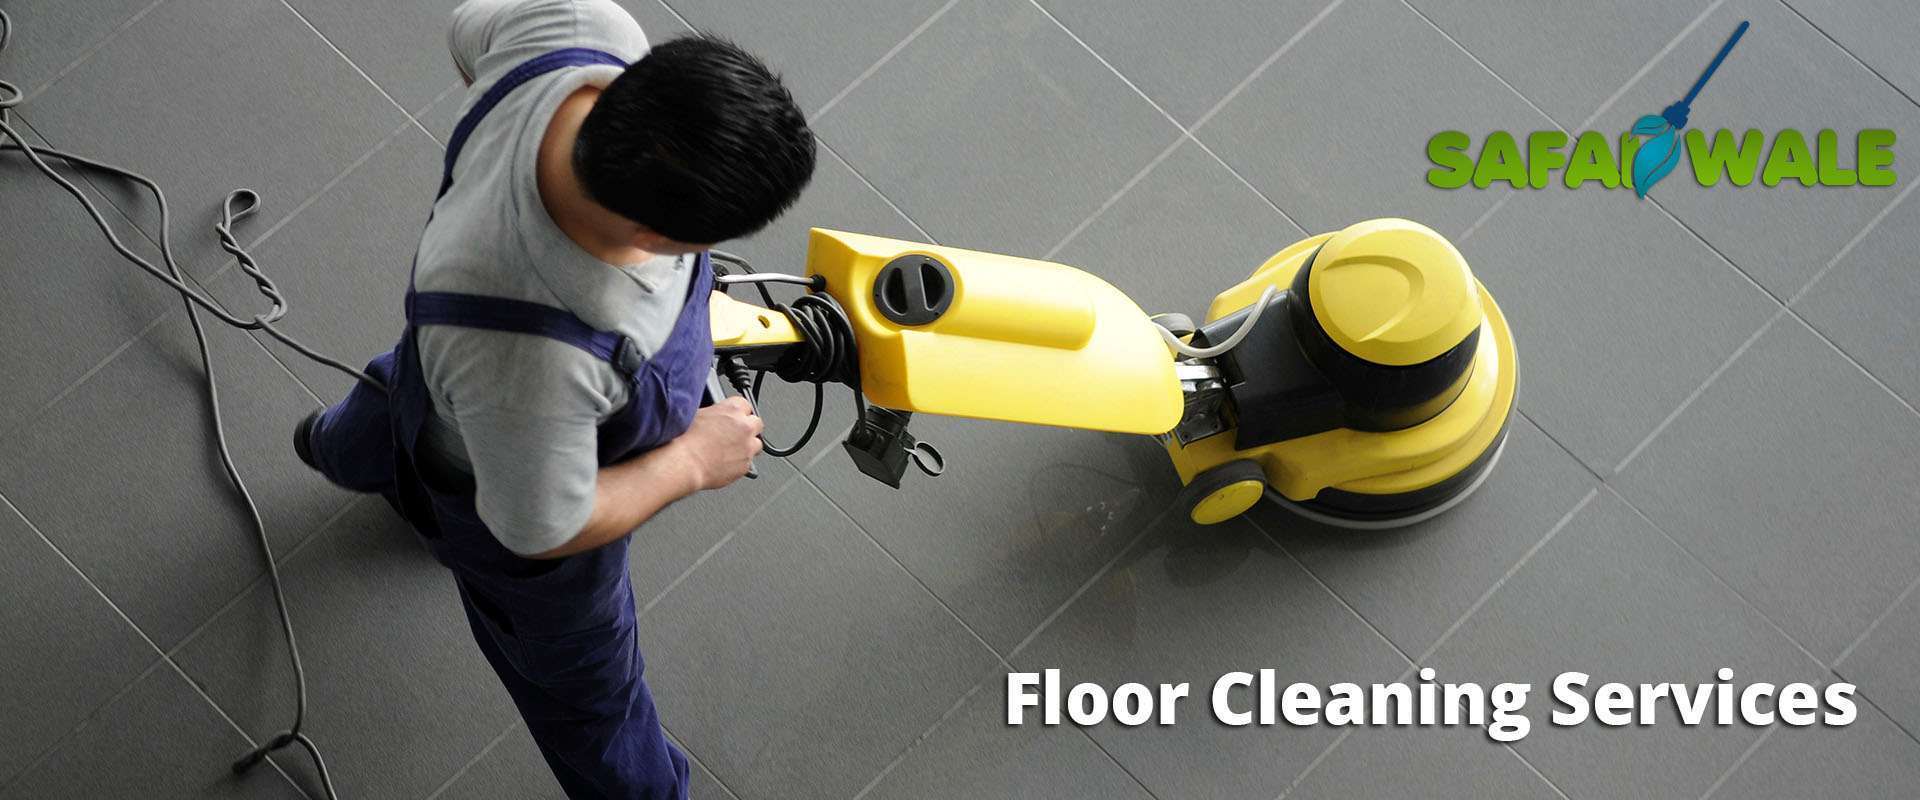 floor cleaning services in ghaziabad